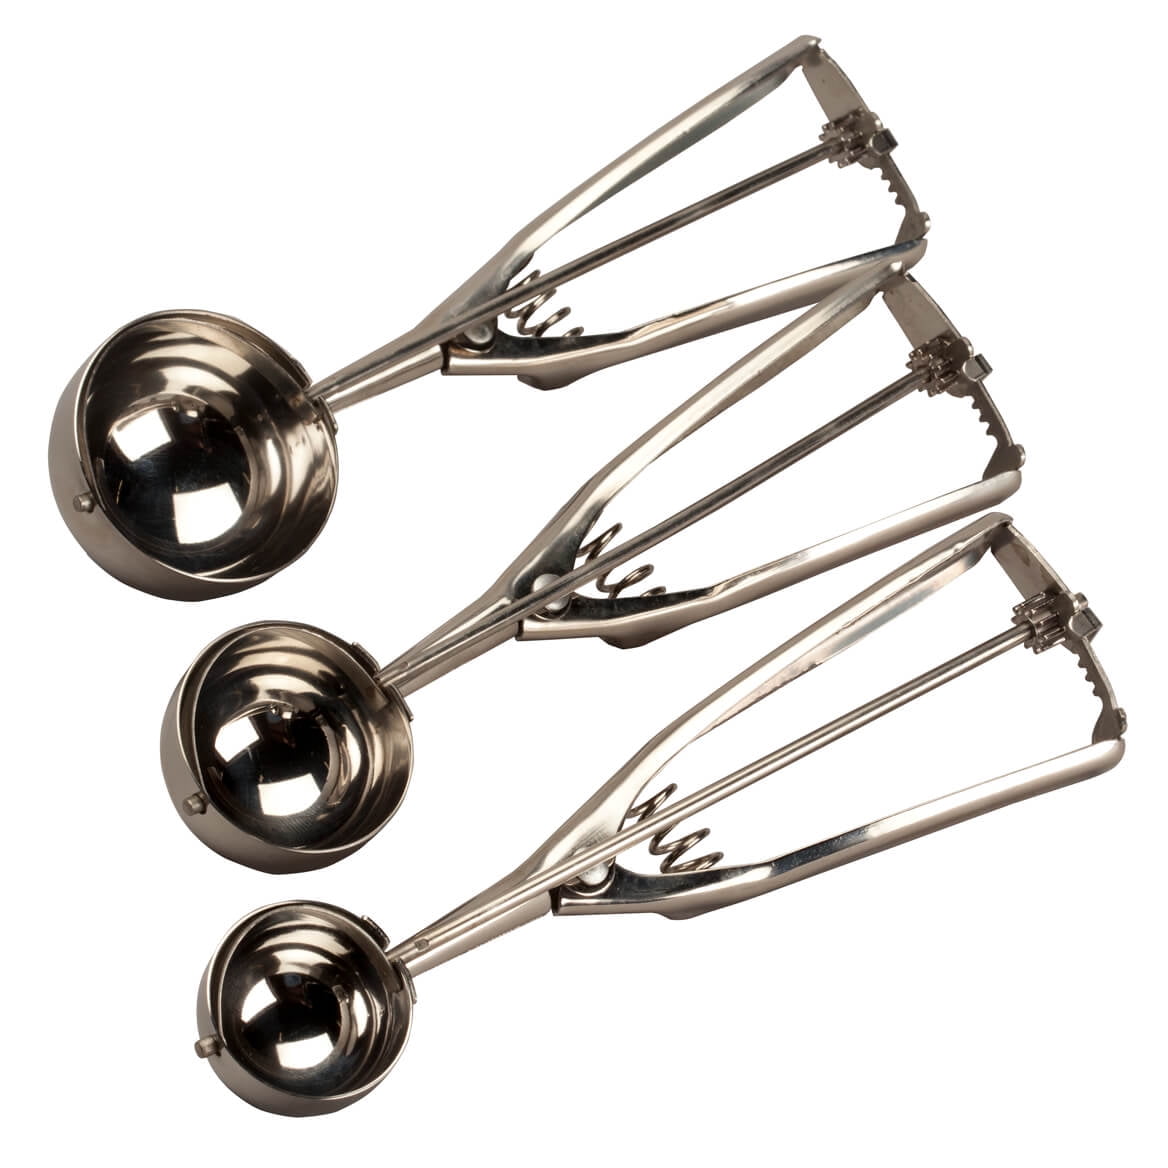 Cookie Dough Metal Cupcake Spoons Include Large-Medium-Small Sizes Balls for Meatball Muffin Melon MOTYYA Ice Cream Scoops Set of 3,Stainless Steel Cookie Scooper with Trigger Release